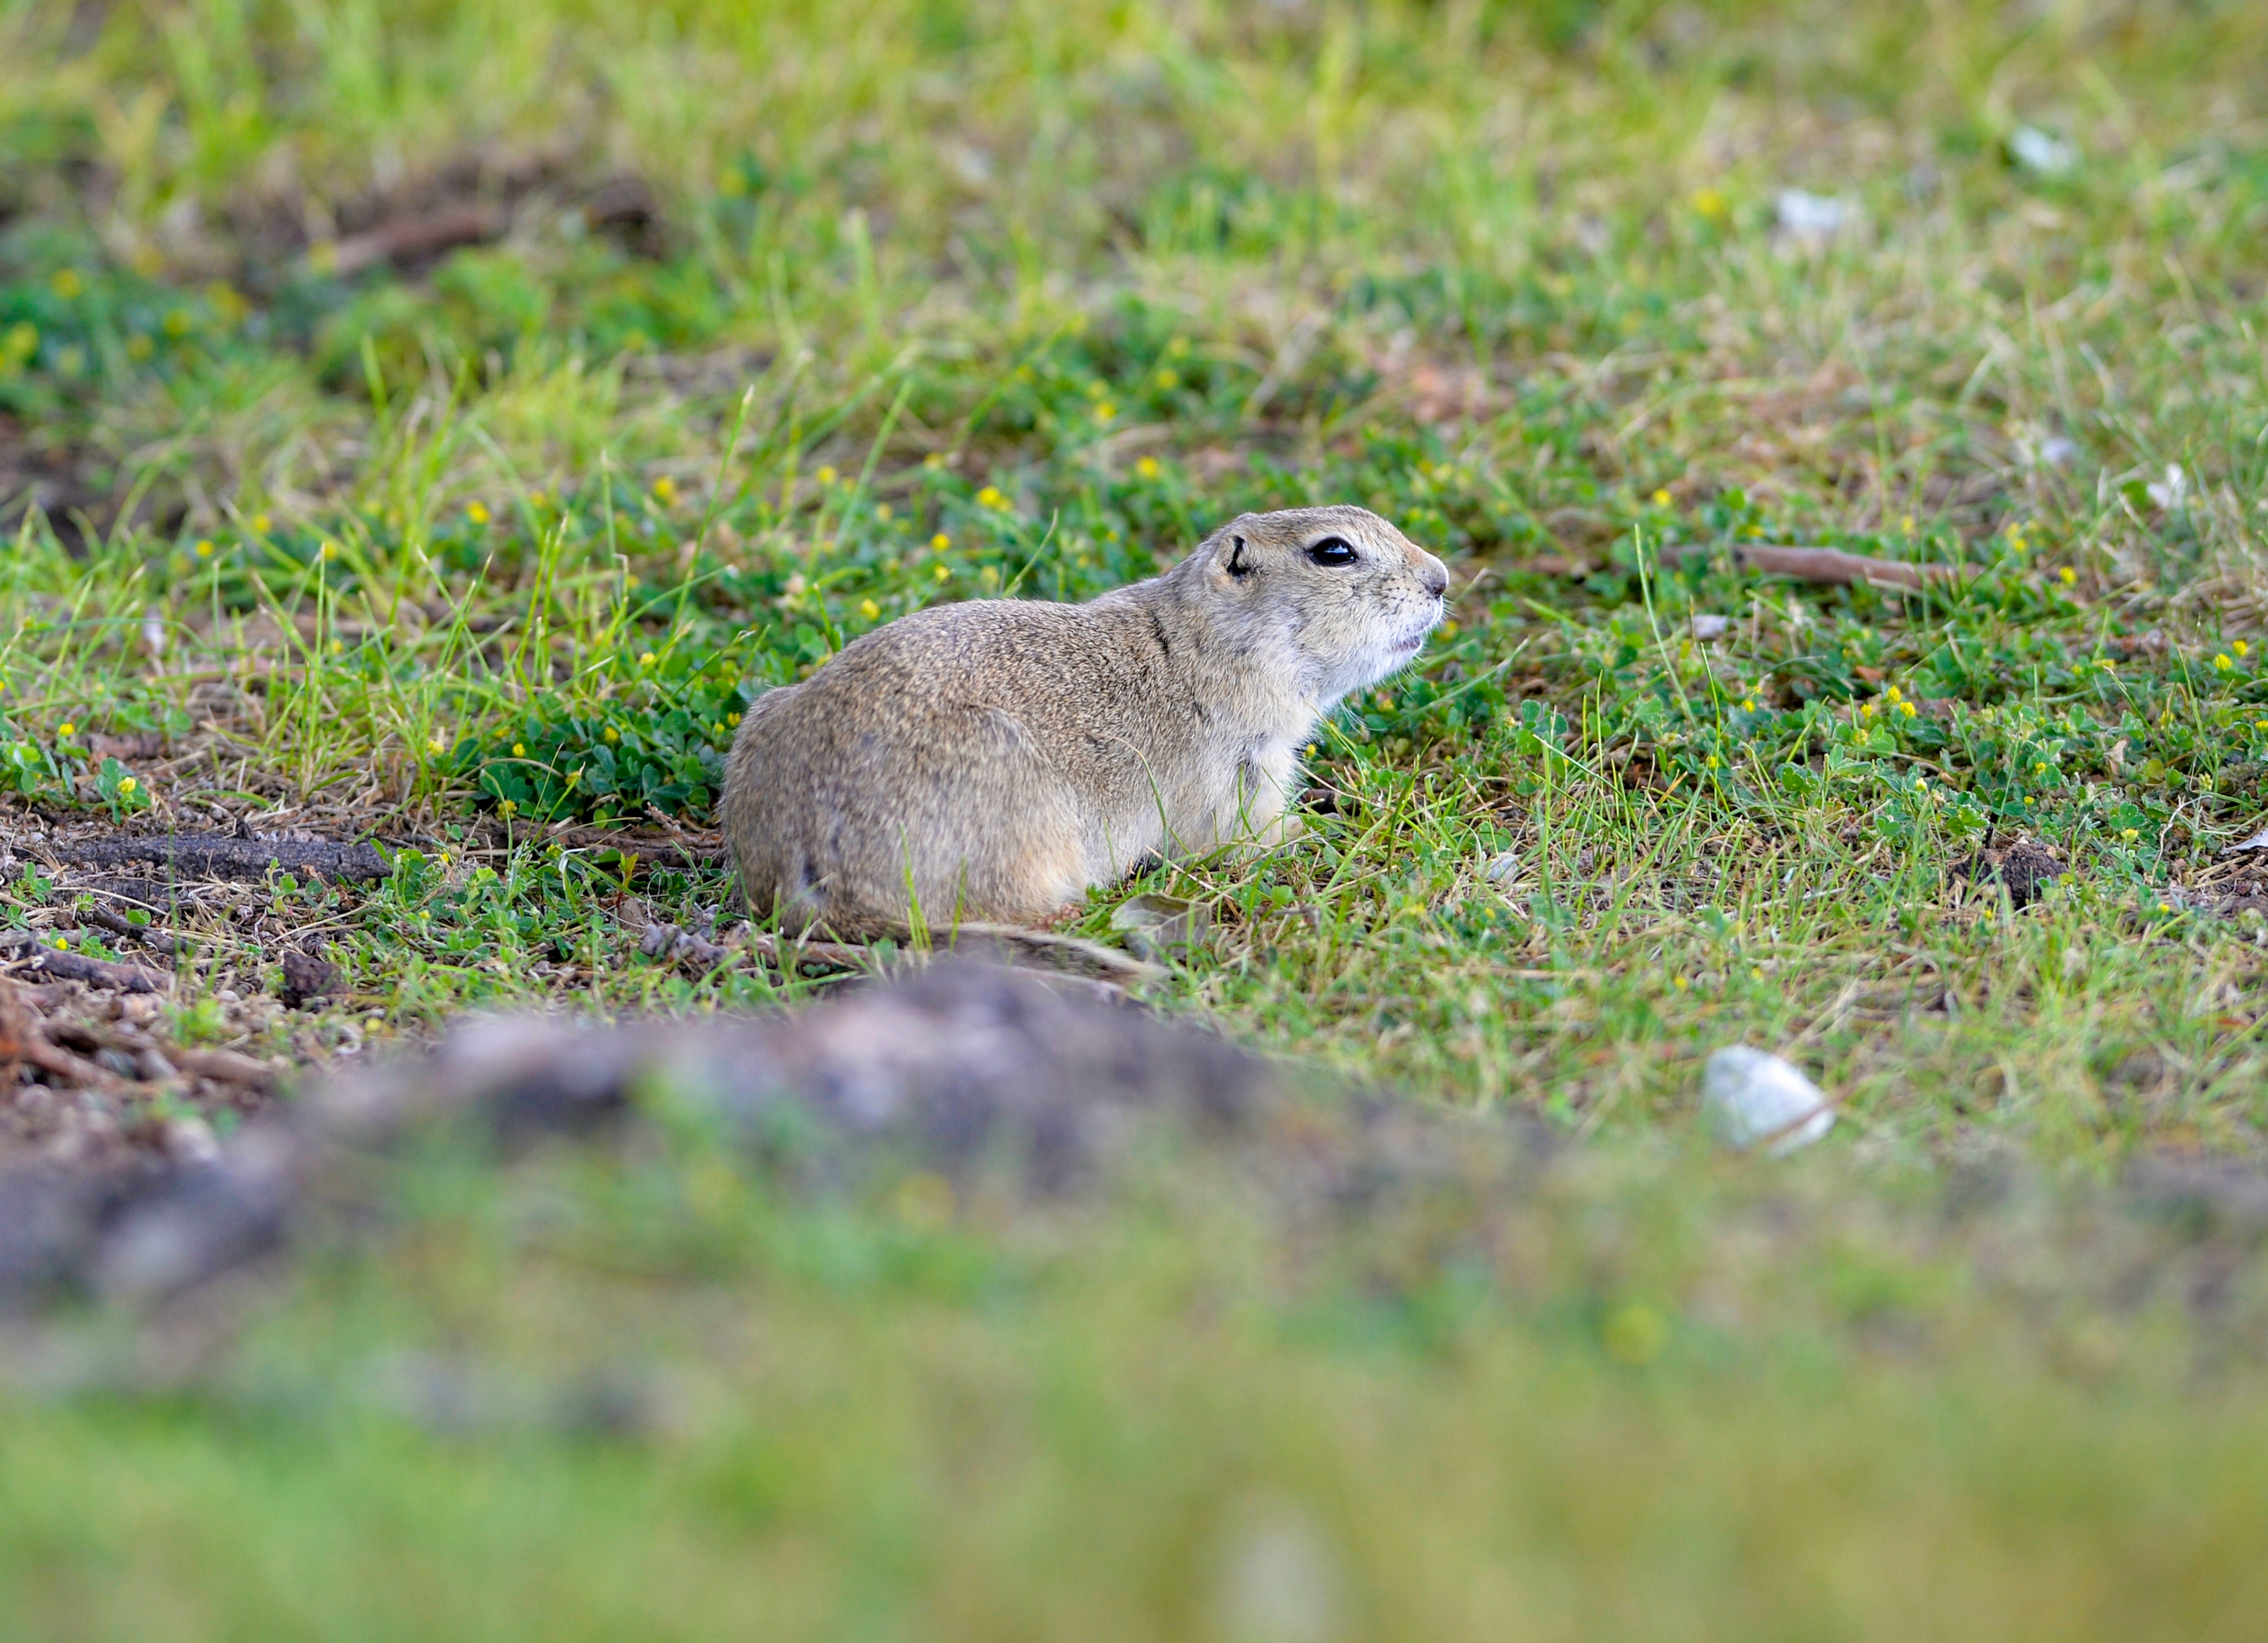 Exploding ground squirrel population prompts control measures